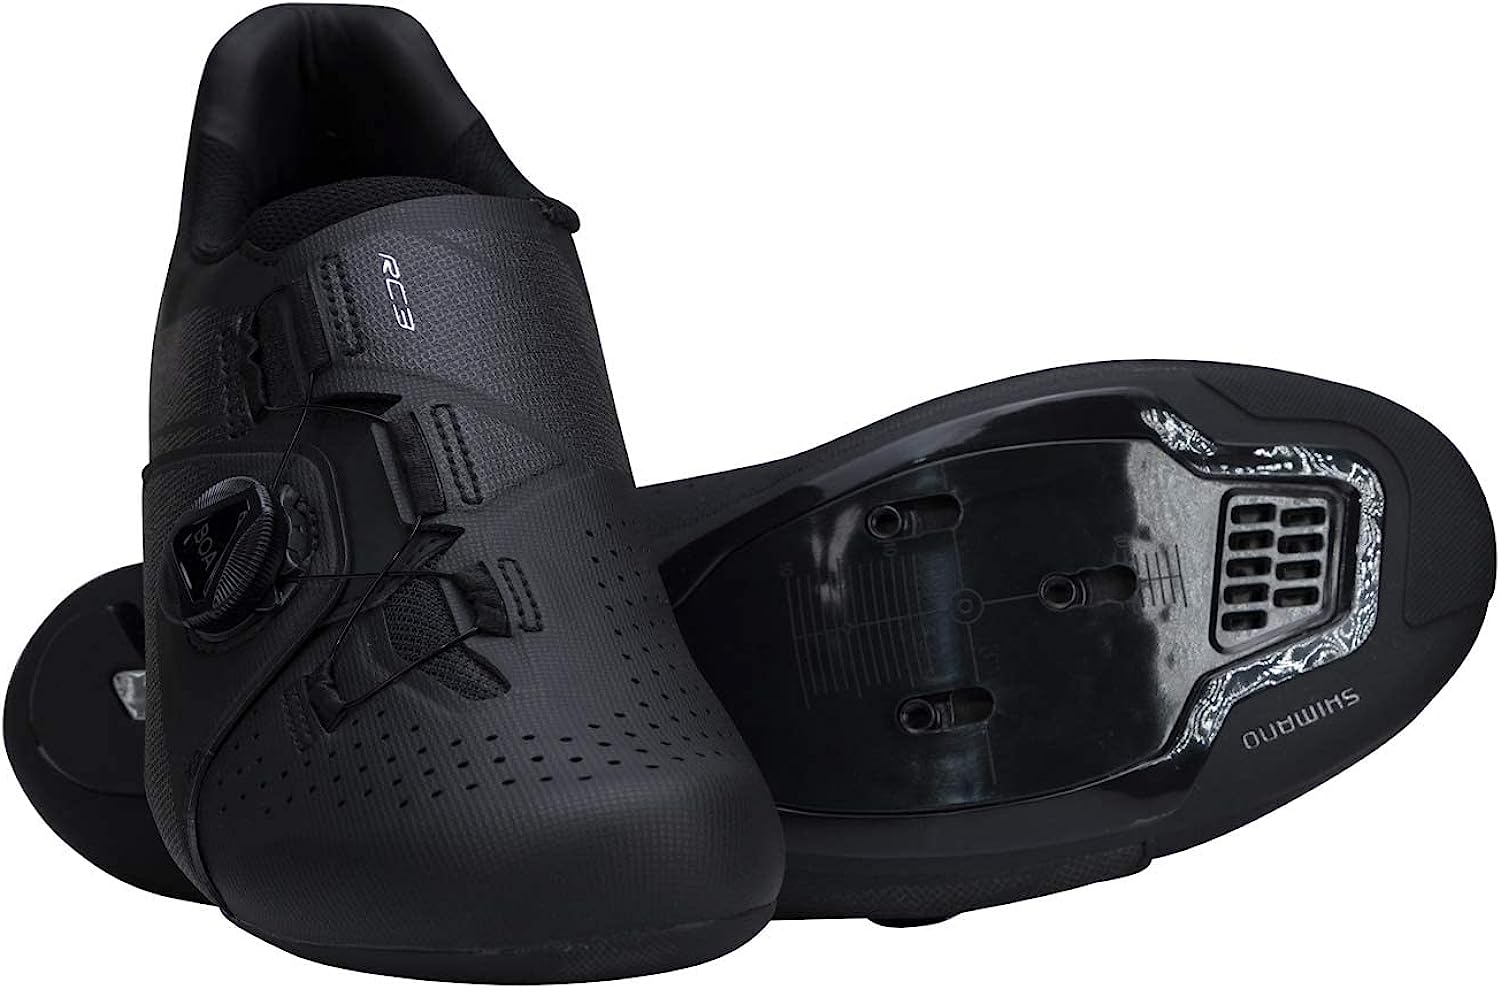 SHIMANO SH-RC300 Value-Packed Road Cycling Shoe, [...]